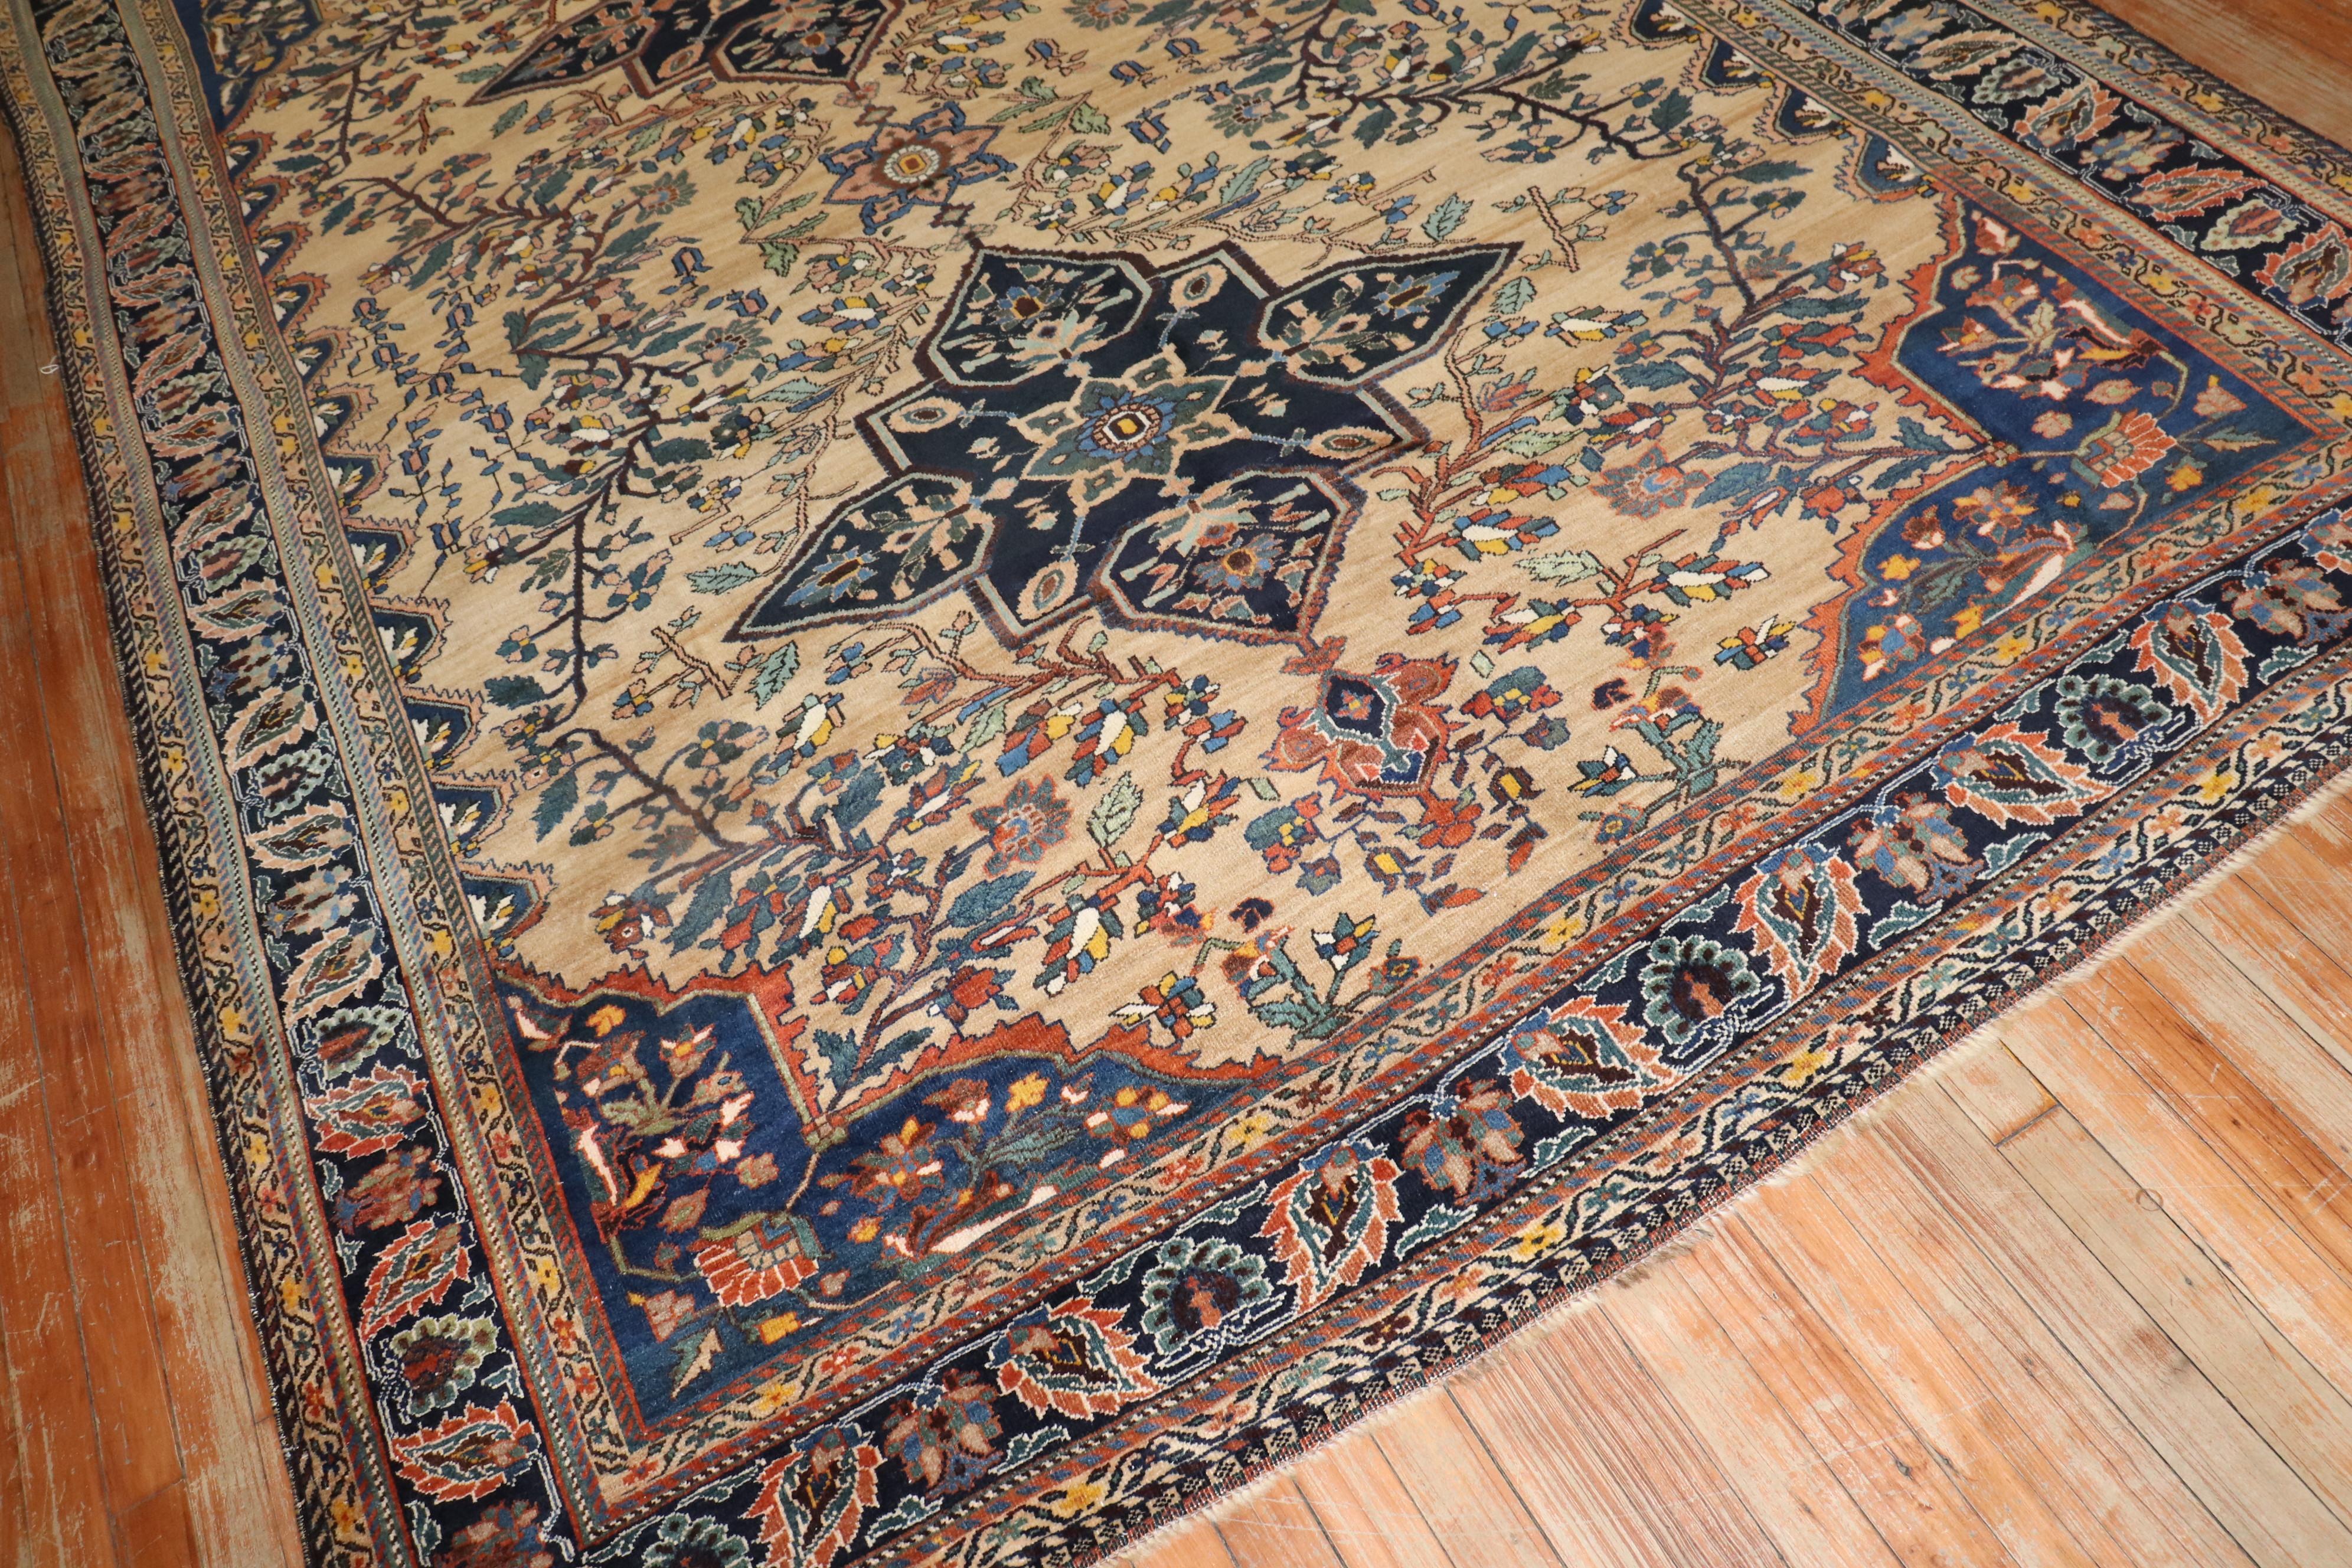 Zabihi Collection Early 20th Century Qashqai Rare Small Room Size Rug For Sale 6